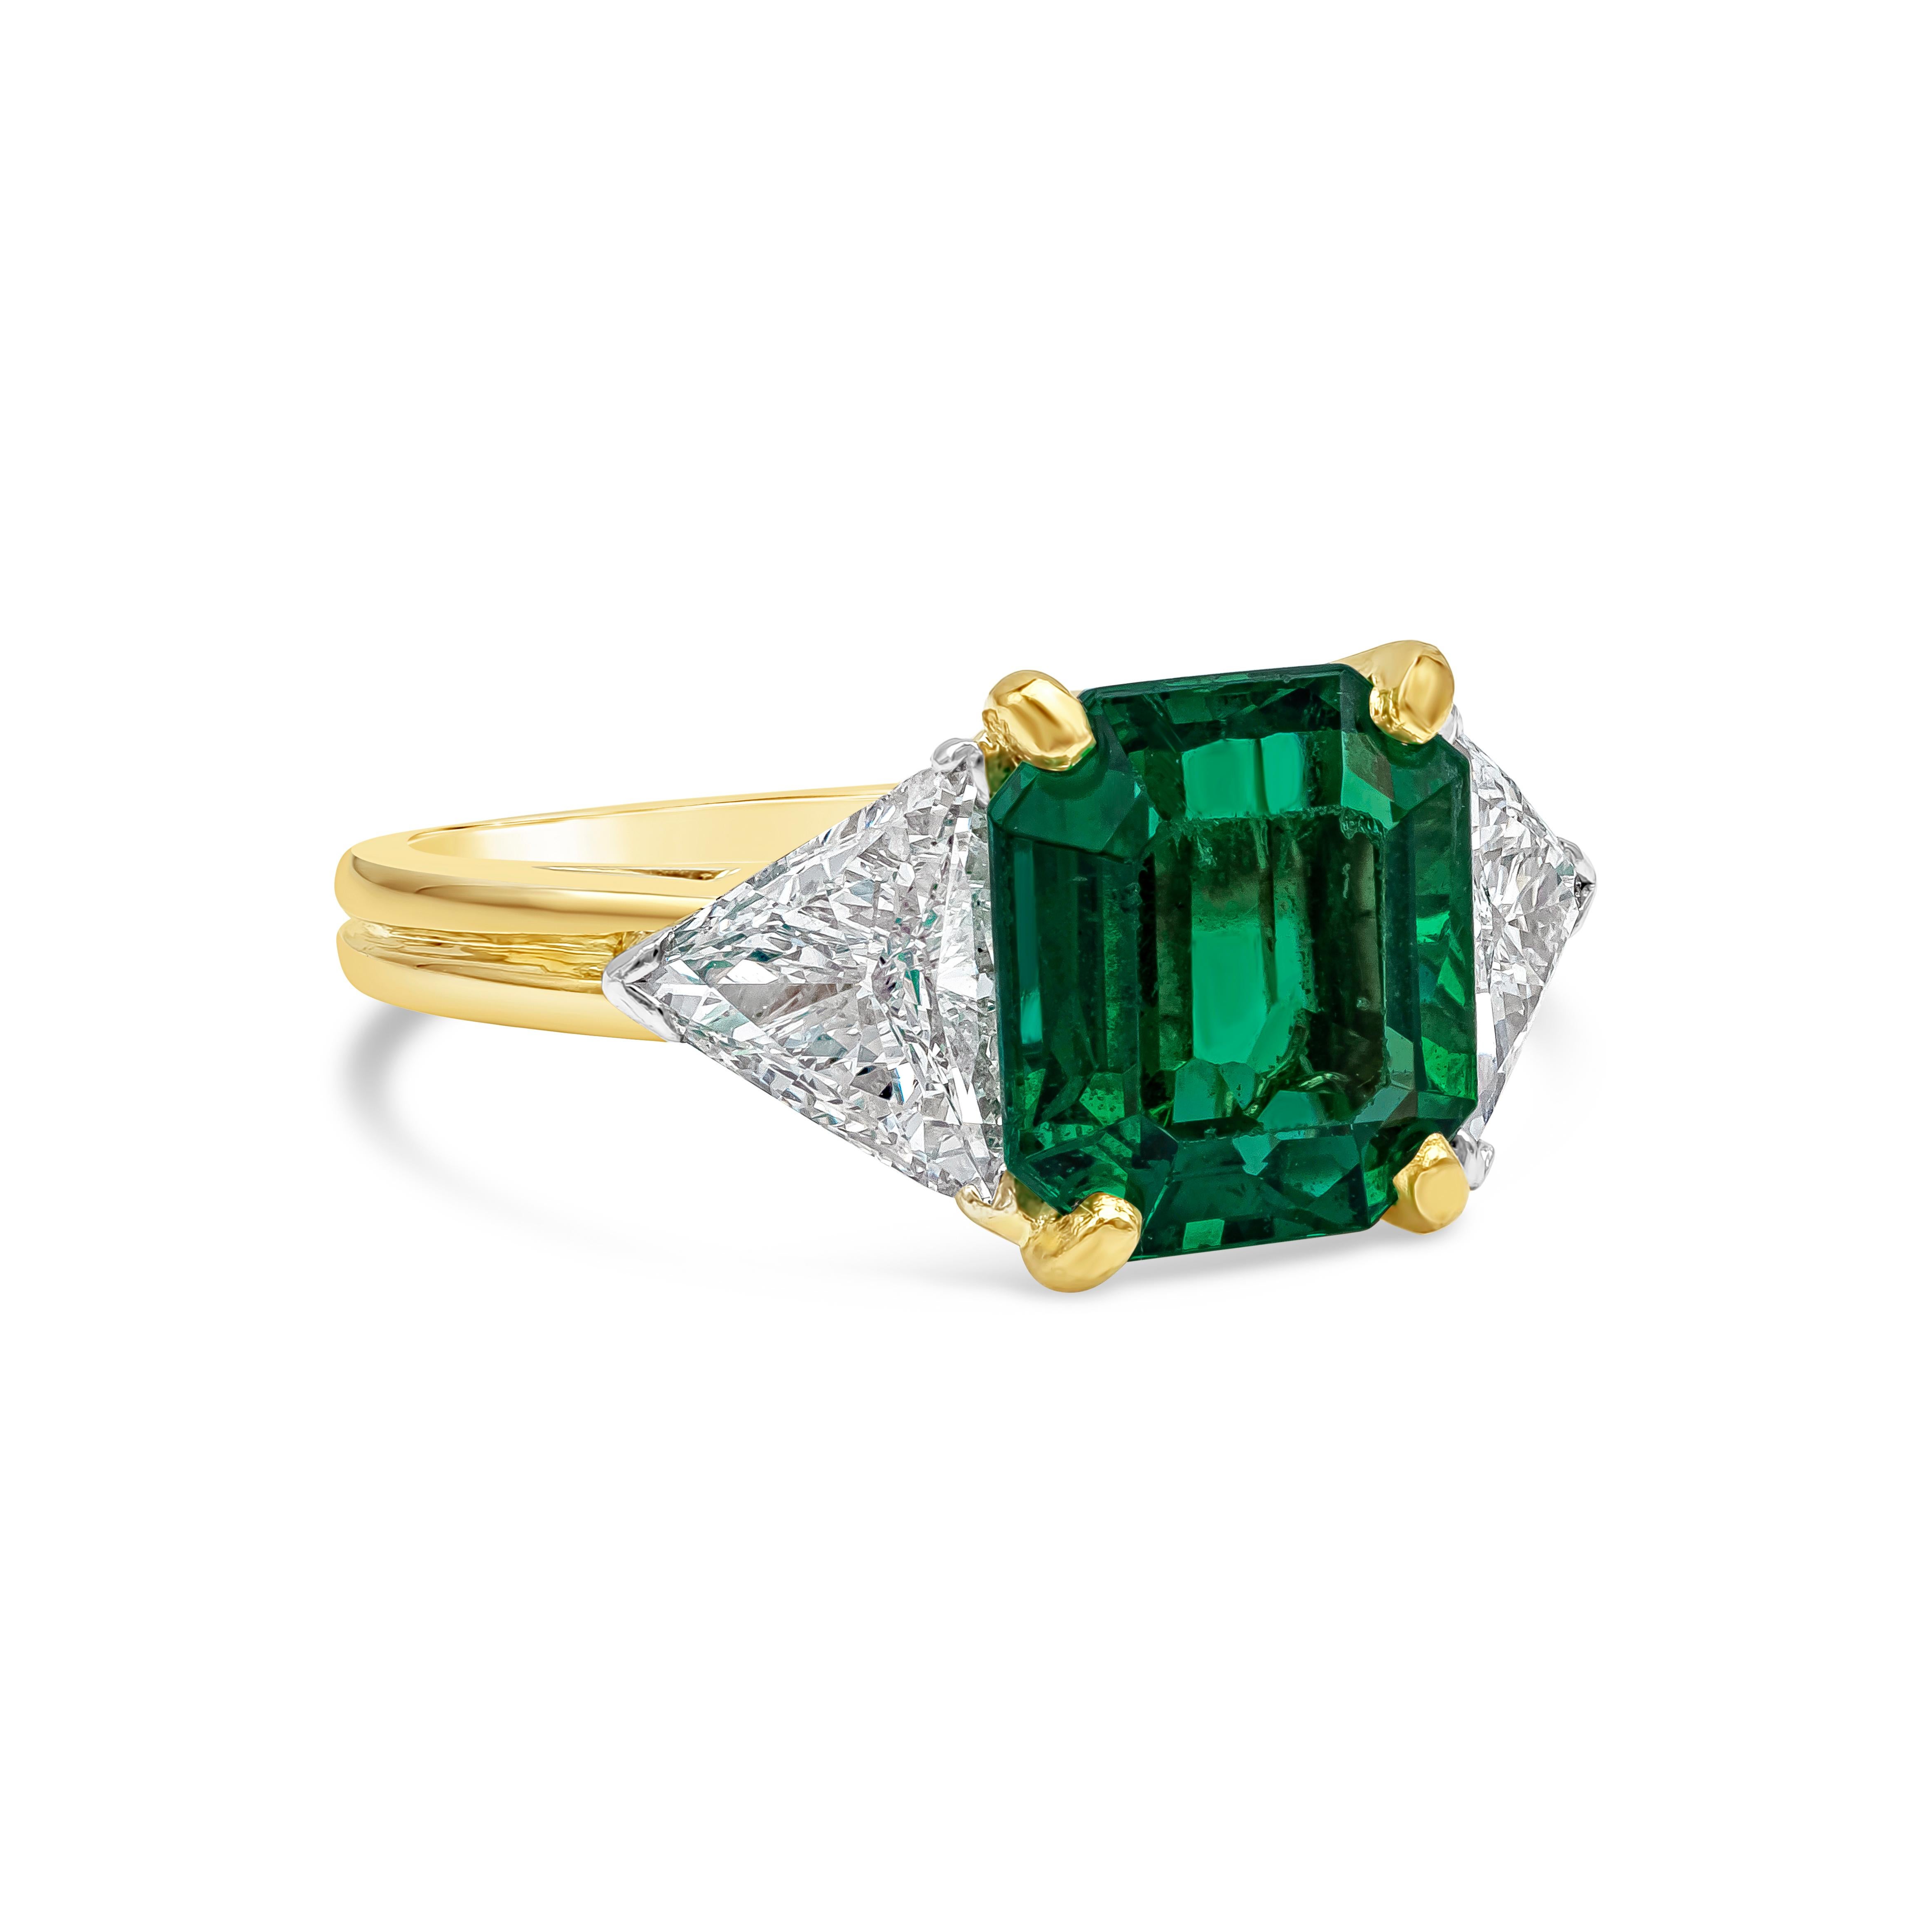 A beautiful gemstone three-stone engagement ring style showcasing 2.91 carat emerald cut green emerald gemstone, VS in Clarity. Flanked by a brilliant trillion cut diamond on each side weighing 1.21 carats total, D-E Color, VS2 in Clarity. Made with